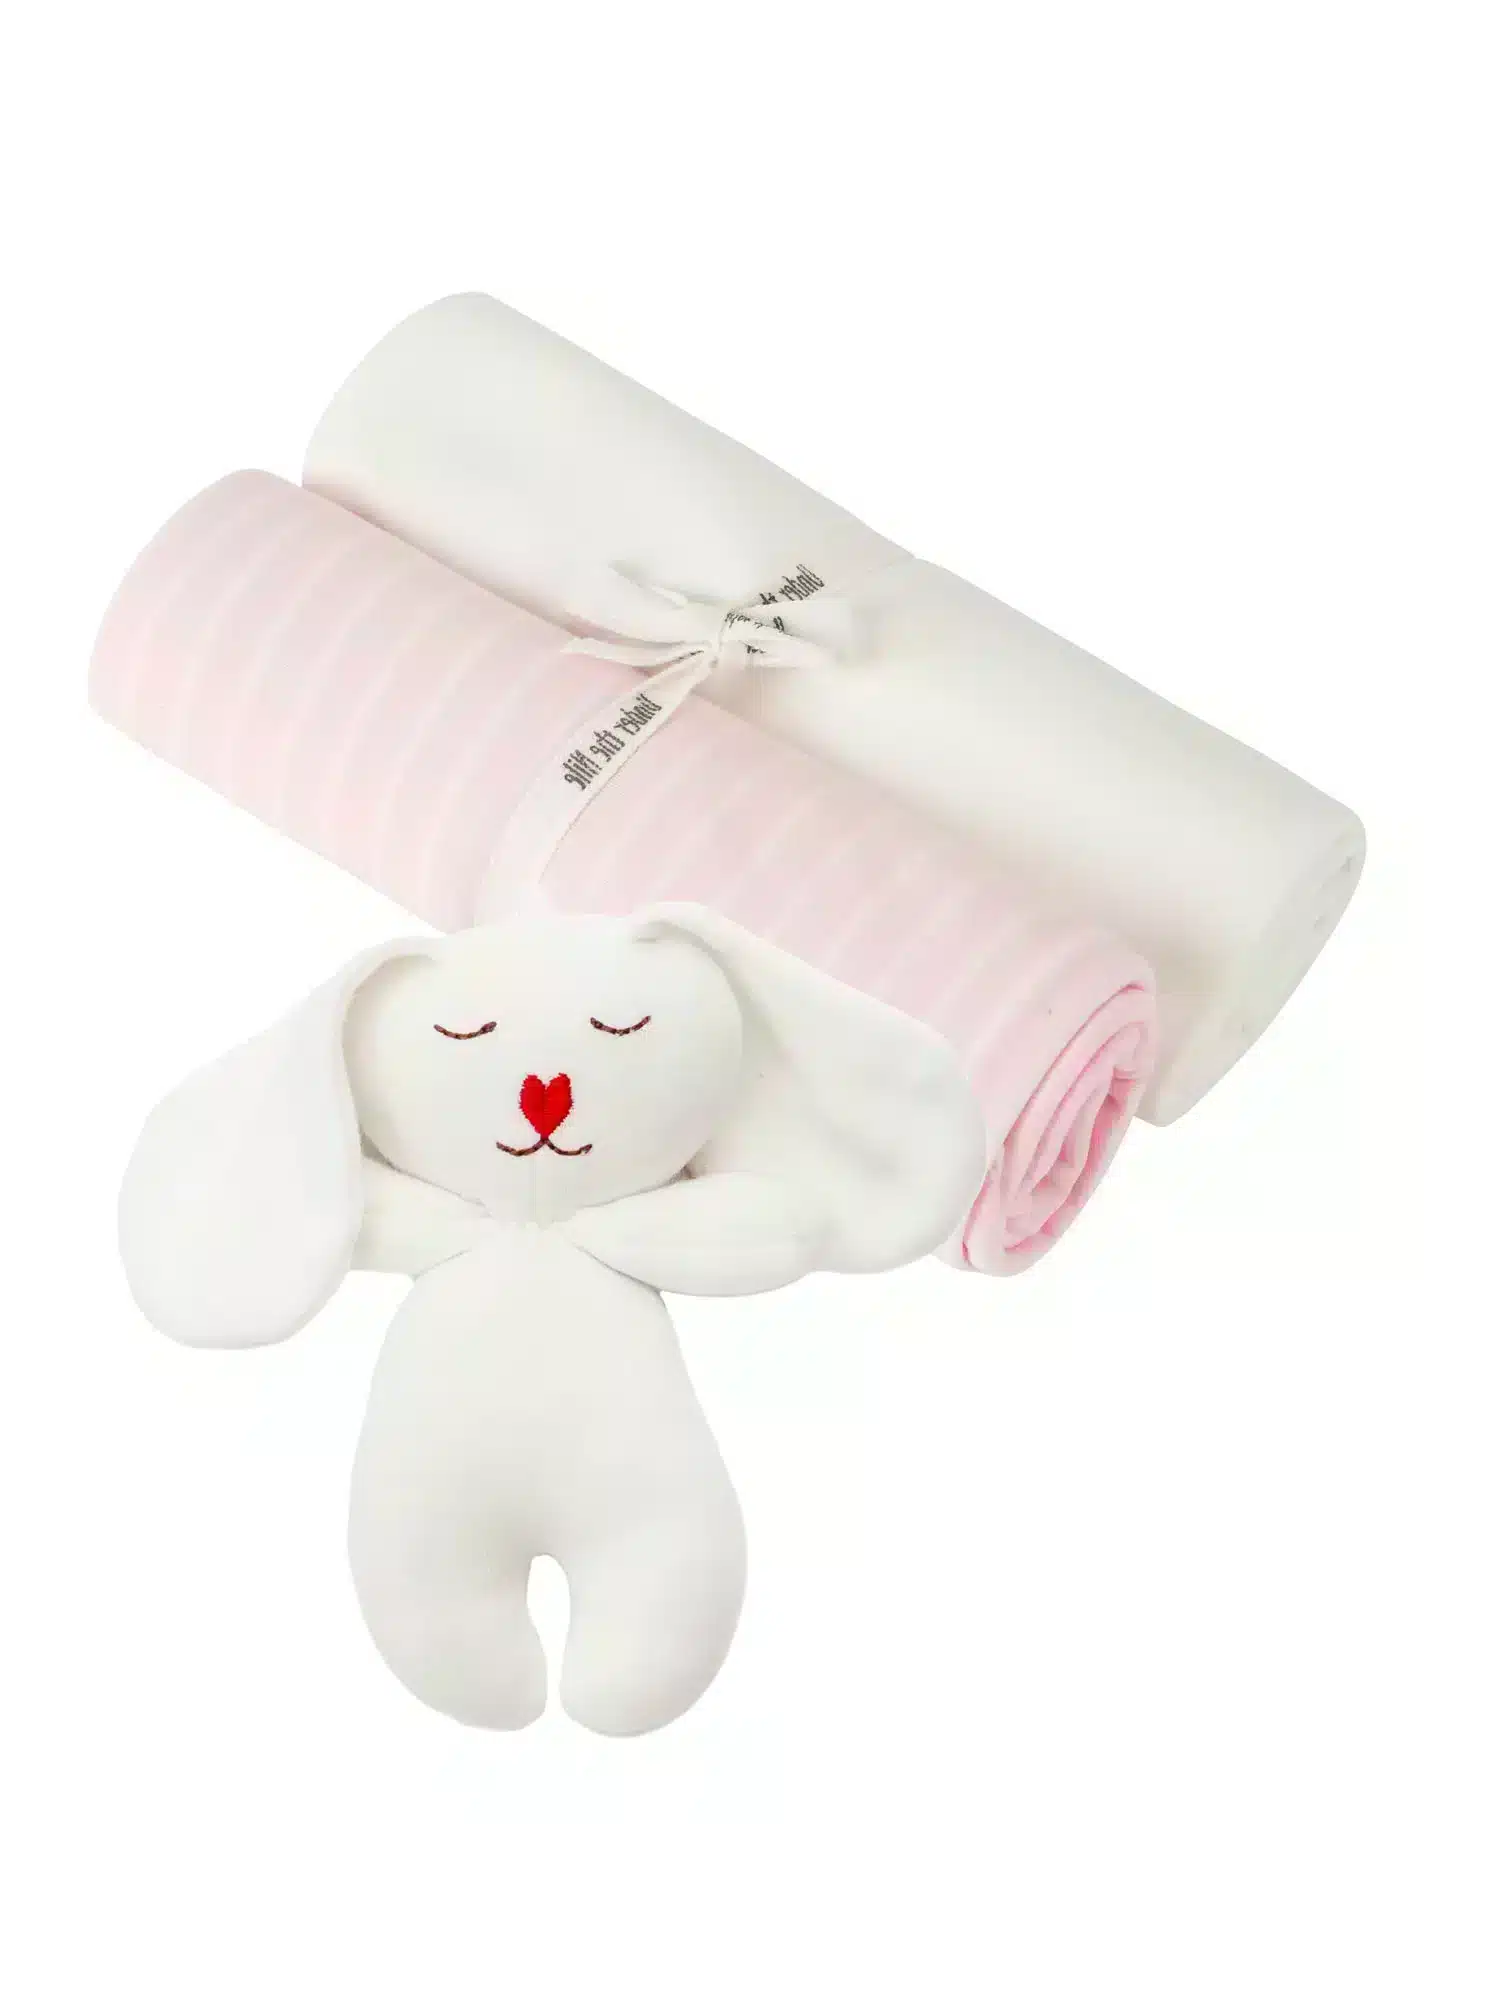 Under the Nile Pink Swaddle Set And Binky Rabbit Toy Gift Set from Gimme the Good Stuff